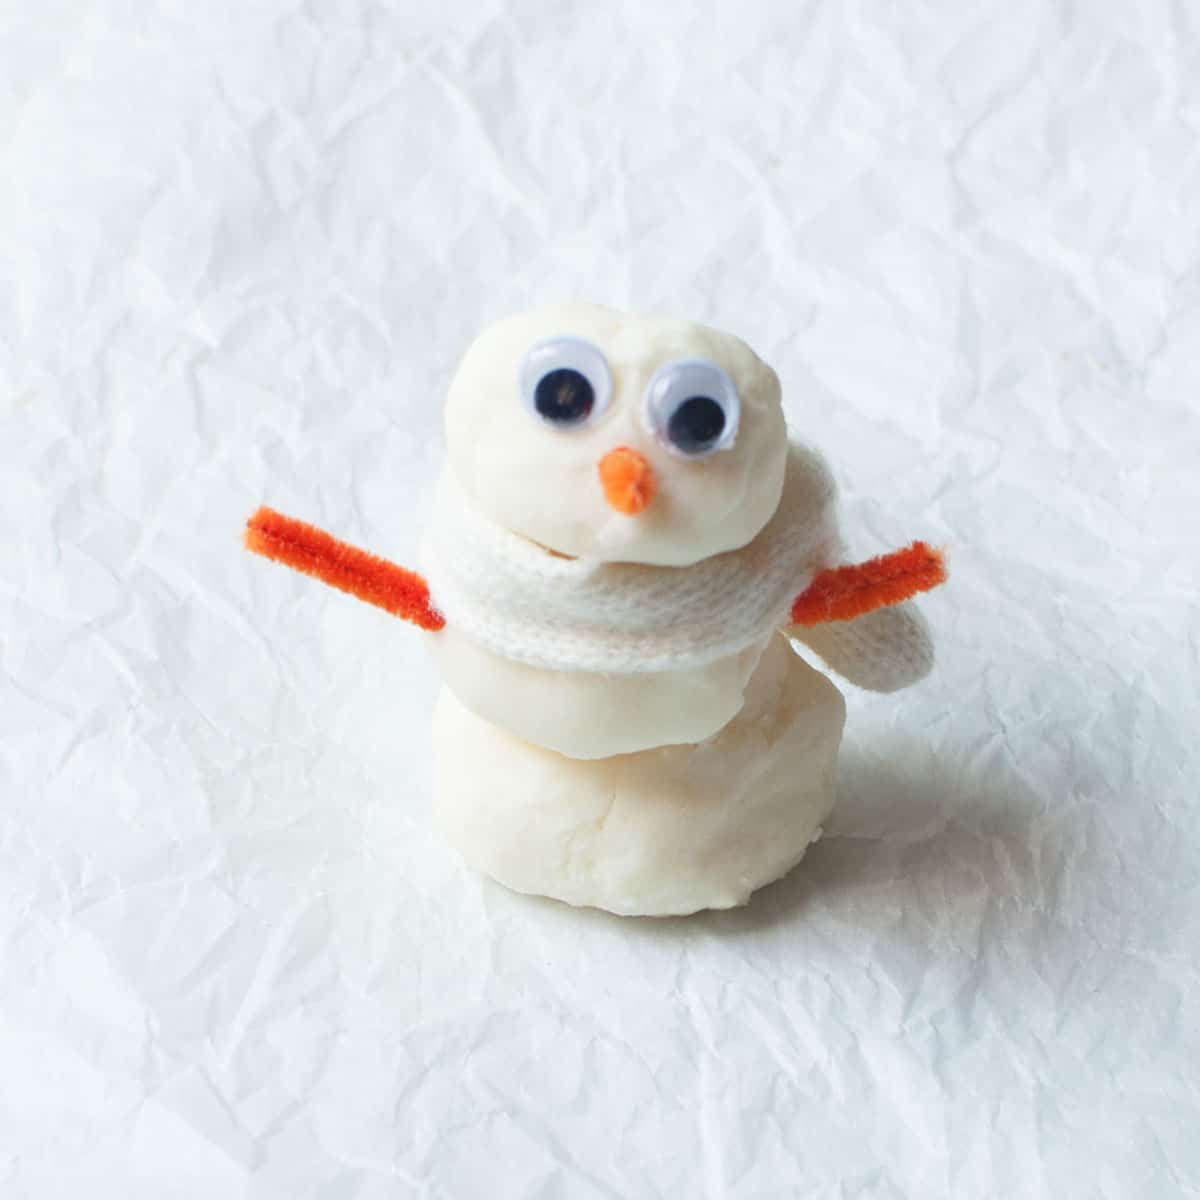 a snow dough snow man (he has googly eyes, a tiny scarf, and pipe cleaners for a nose and arms). 